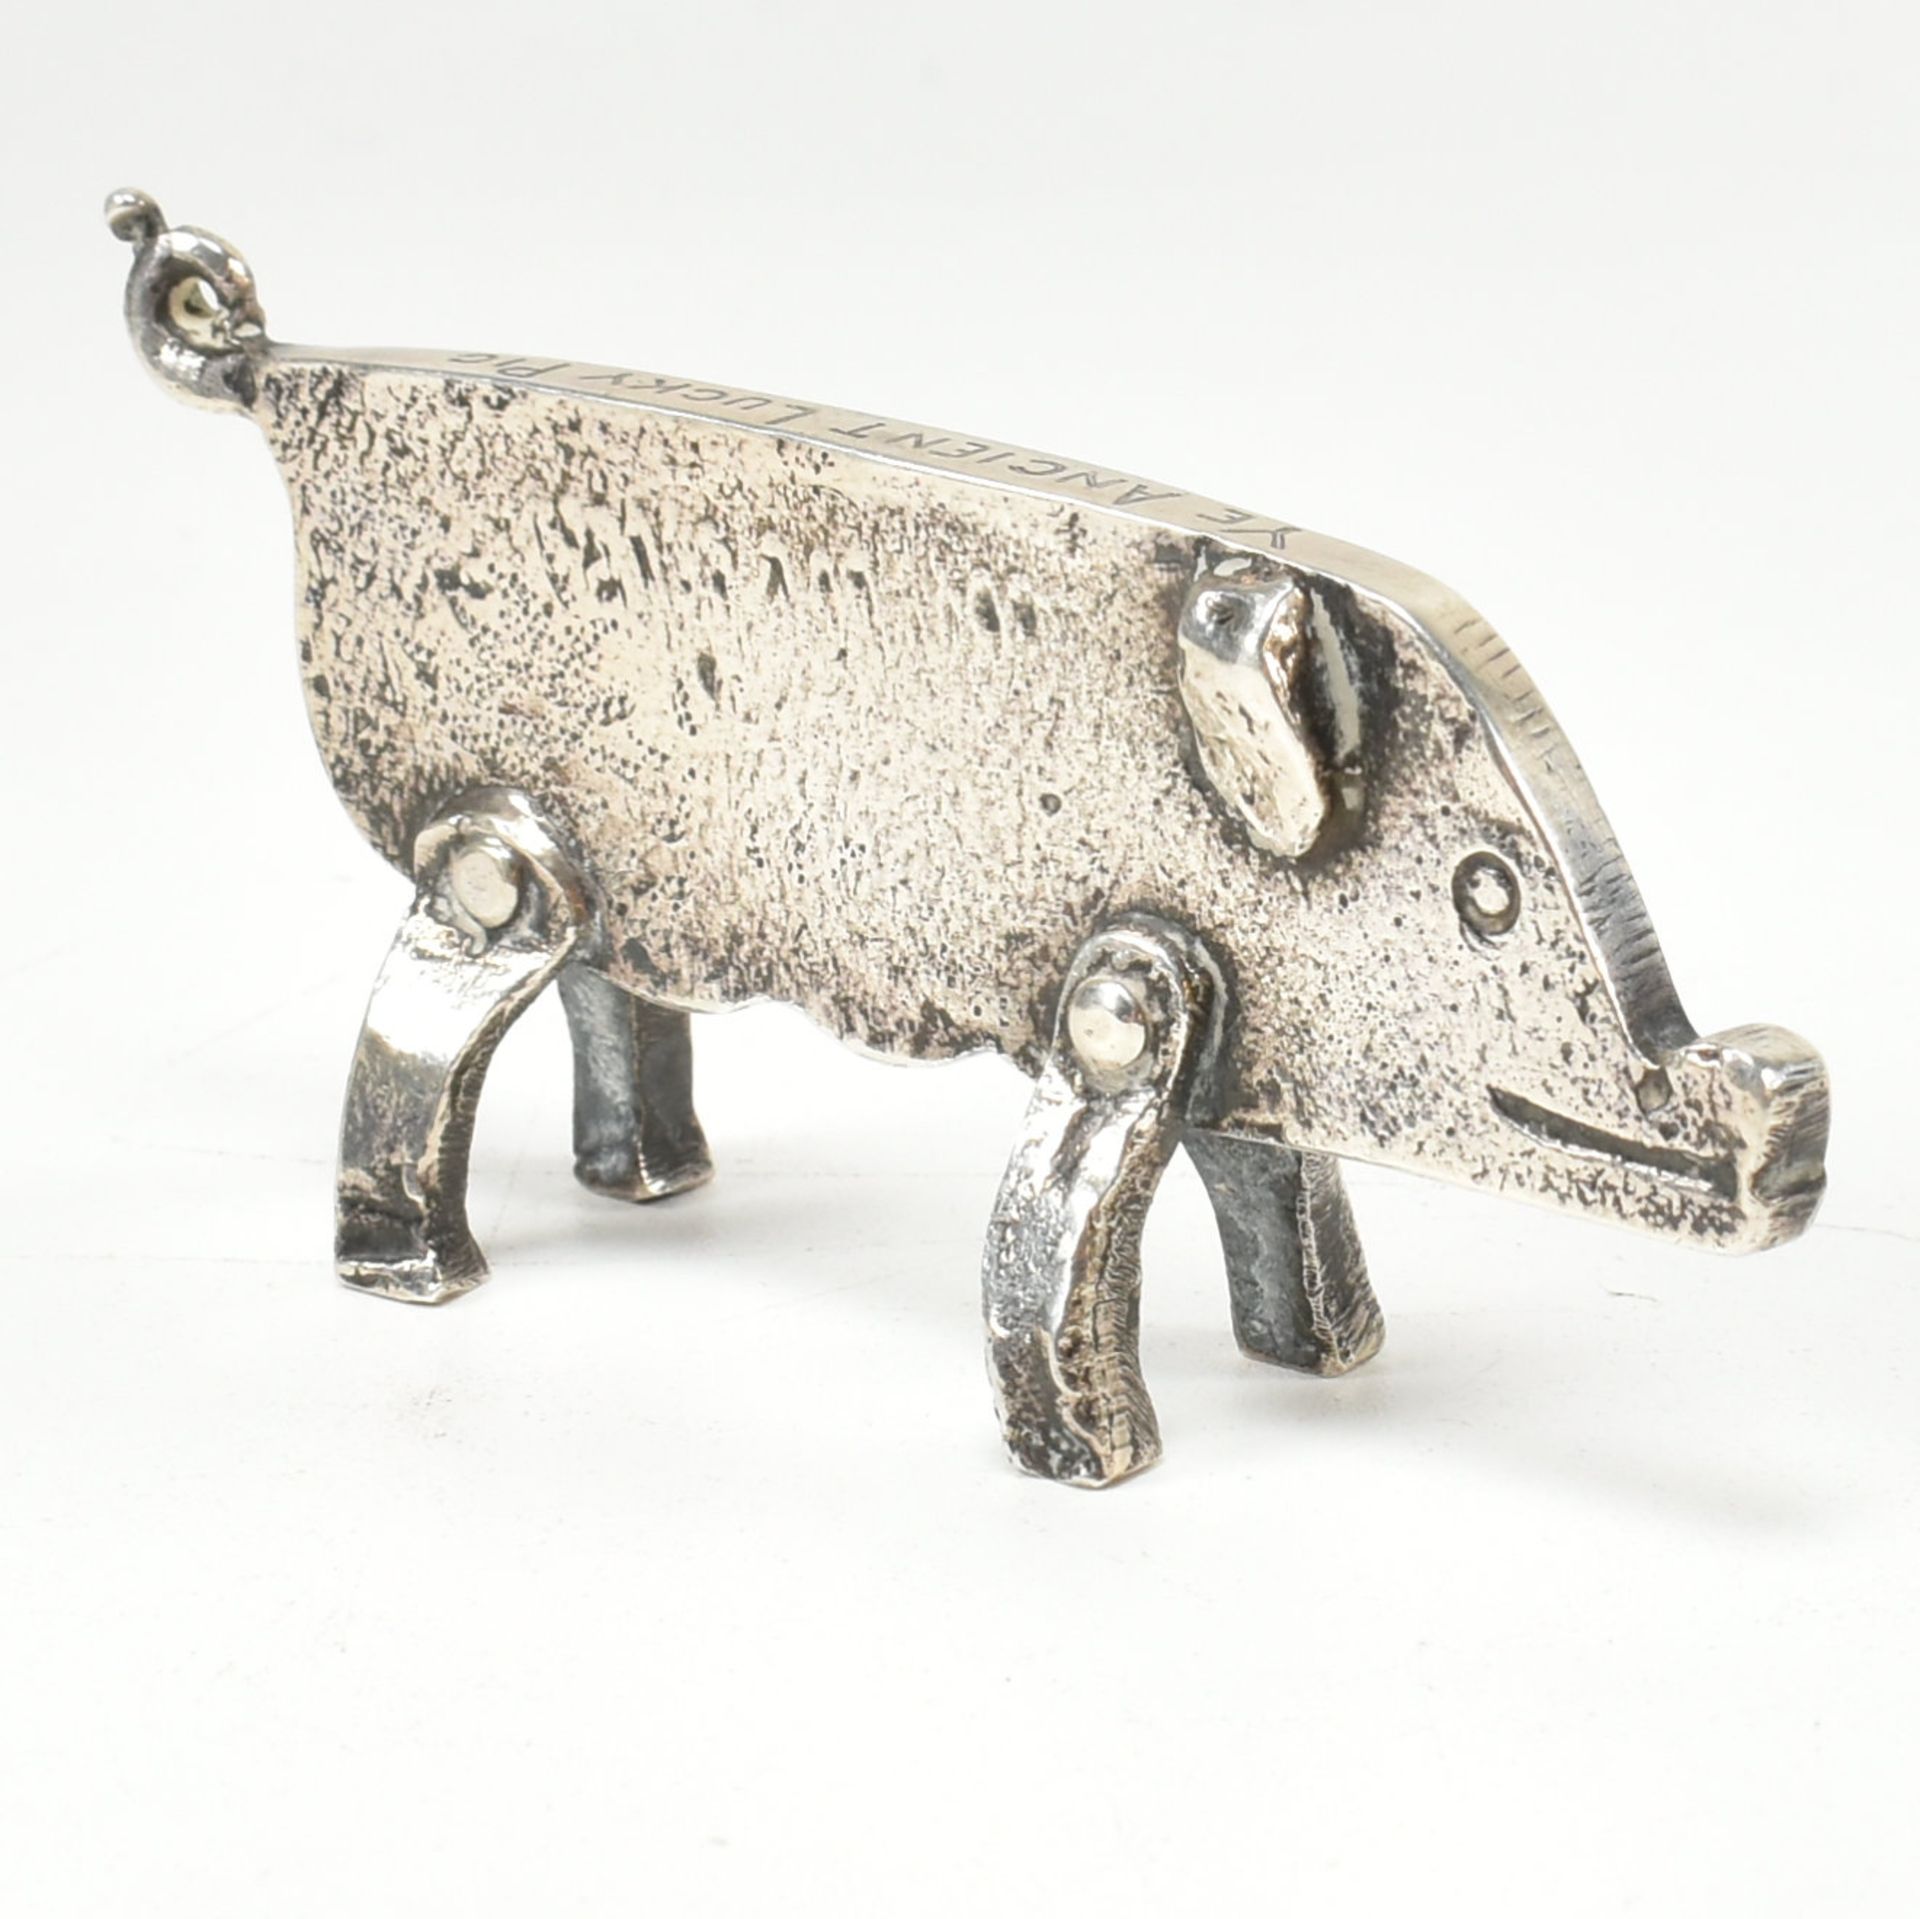 ARTS & CRAFTS EARLY 20TH CENTURY LUCKY PIG FIGURINE